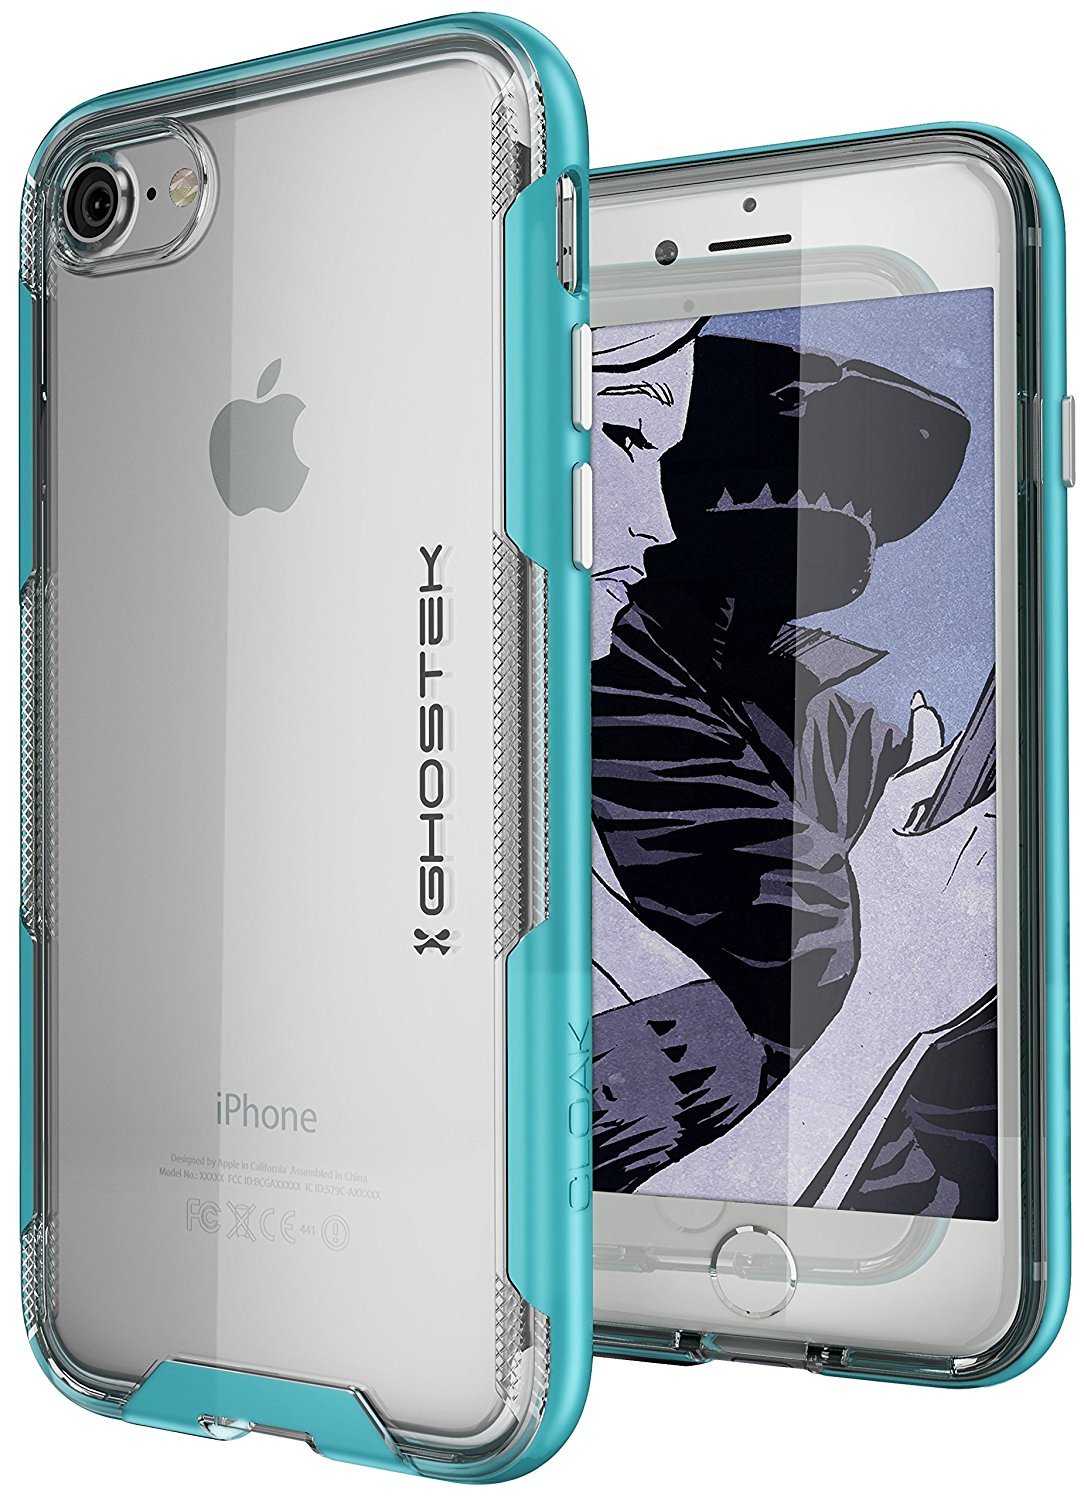 iPhone 7 Case, Ghostek Cloak 3 Series for iPhone 7 Clear Protective Case | Teal